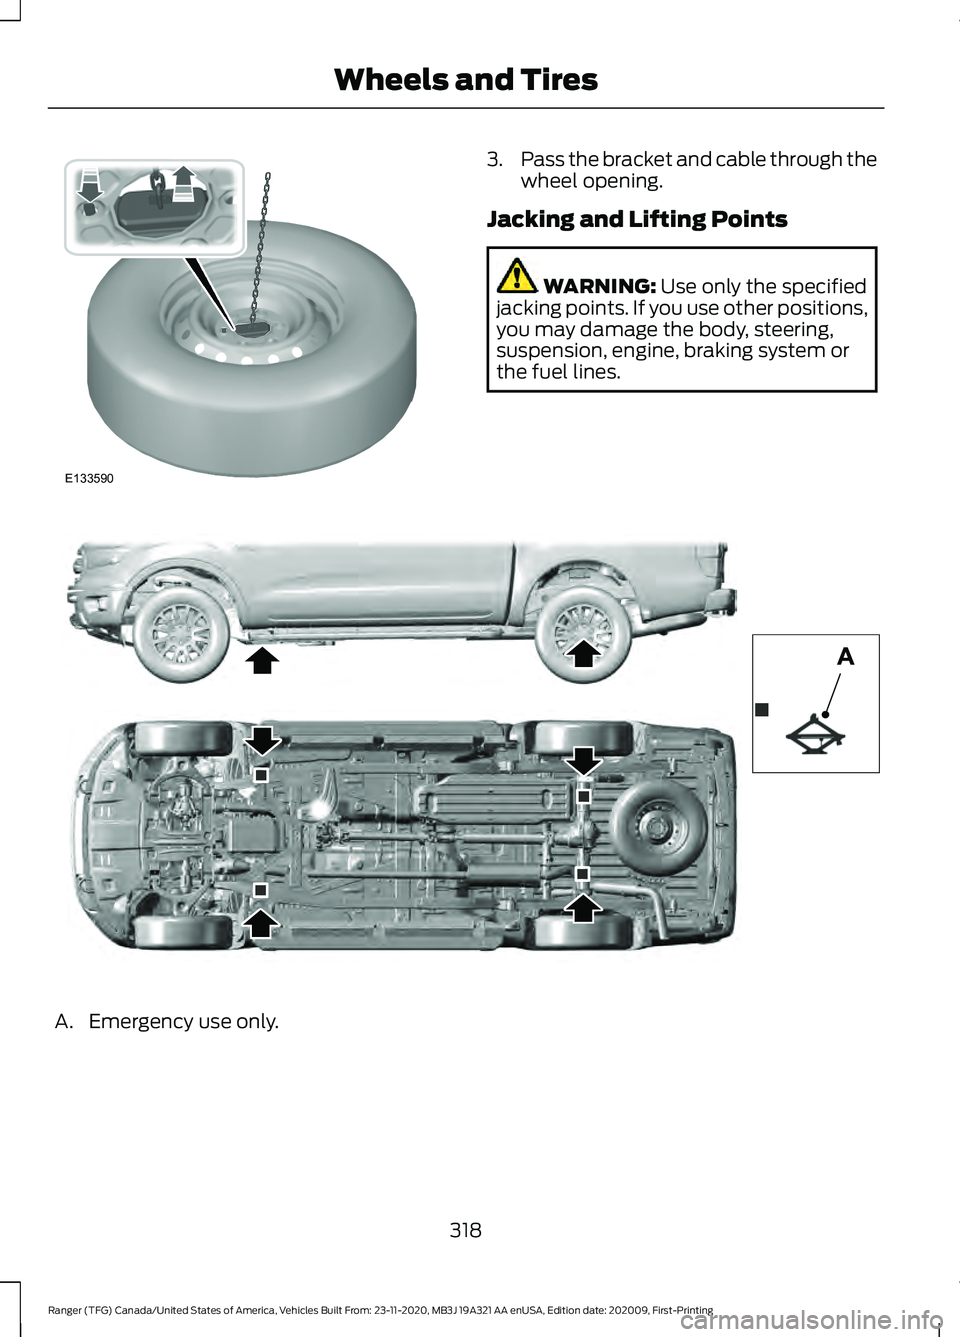 FORD RANGER 2021  Owners Manual 3.
Pass the bracket and cable through the
wheel opening.
Jacking and Lifting Points WARNING: Use only the specified
jacking points. If you use other positions,
you may damage the body, steering,
suspe